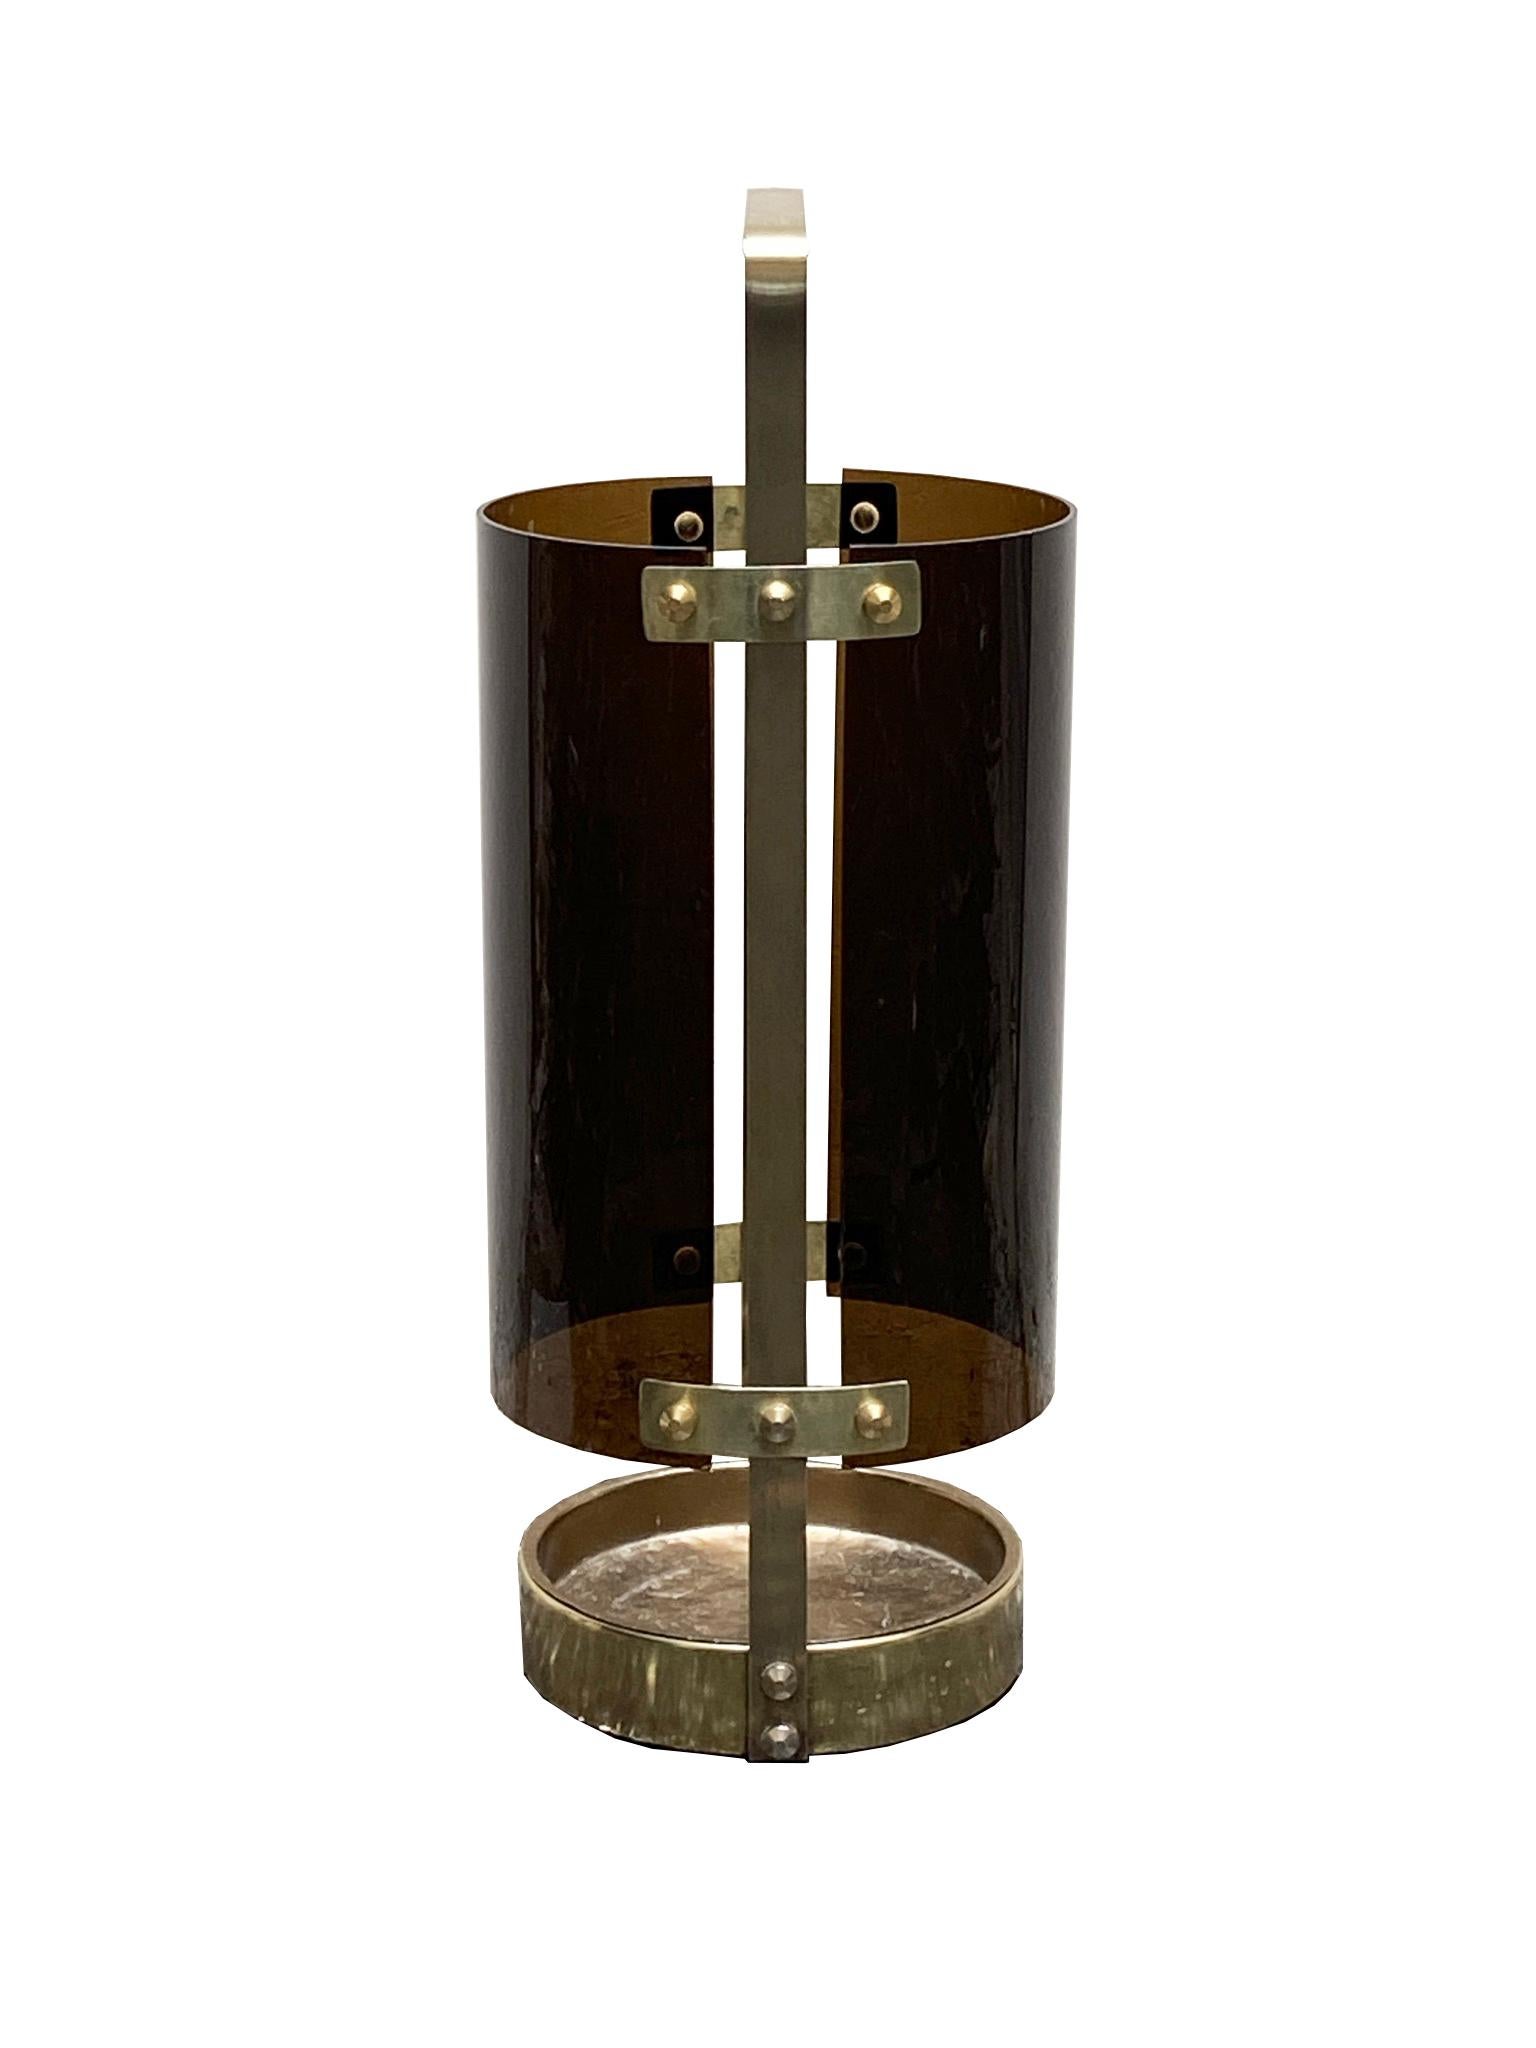 This original vintage Hollywood Regency umbrella stand was produced in the 1970s in Italy. The middle part for holding the umbrella is made of acryl plastic glass. At the bottom the item has a water dipping shell element. As the element is made of